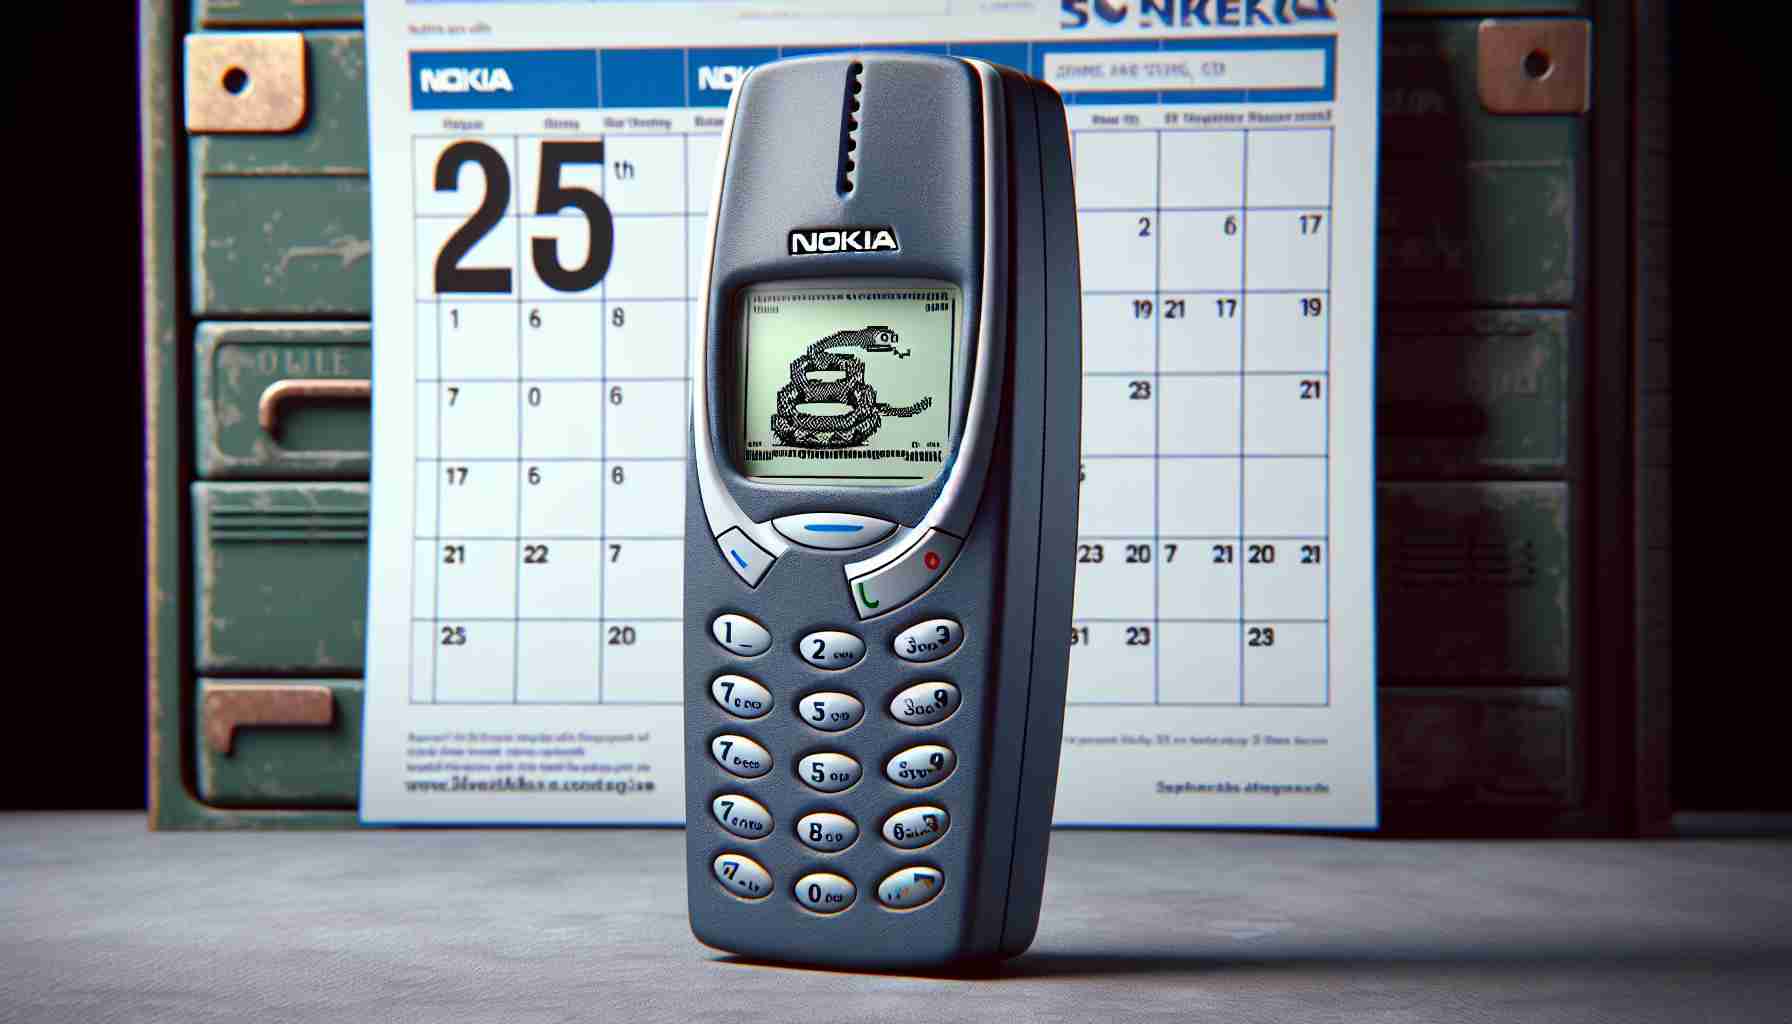 The Nokia 3210 Makes a Triumphant Return for its 25th Anniversary